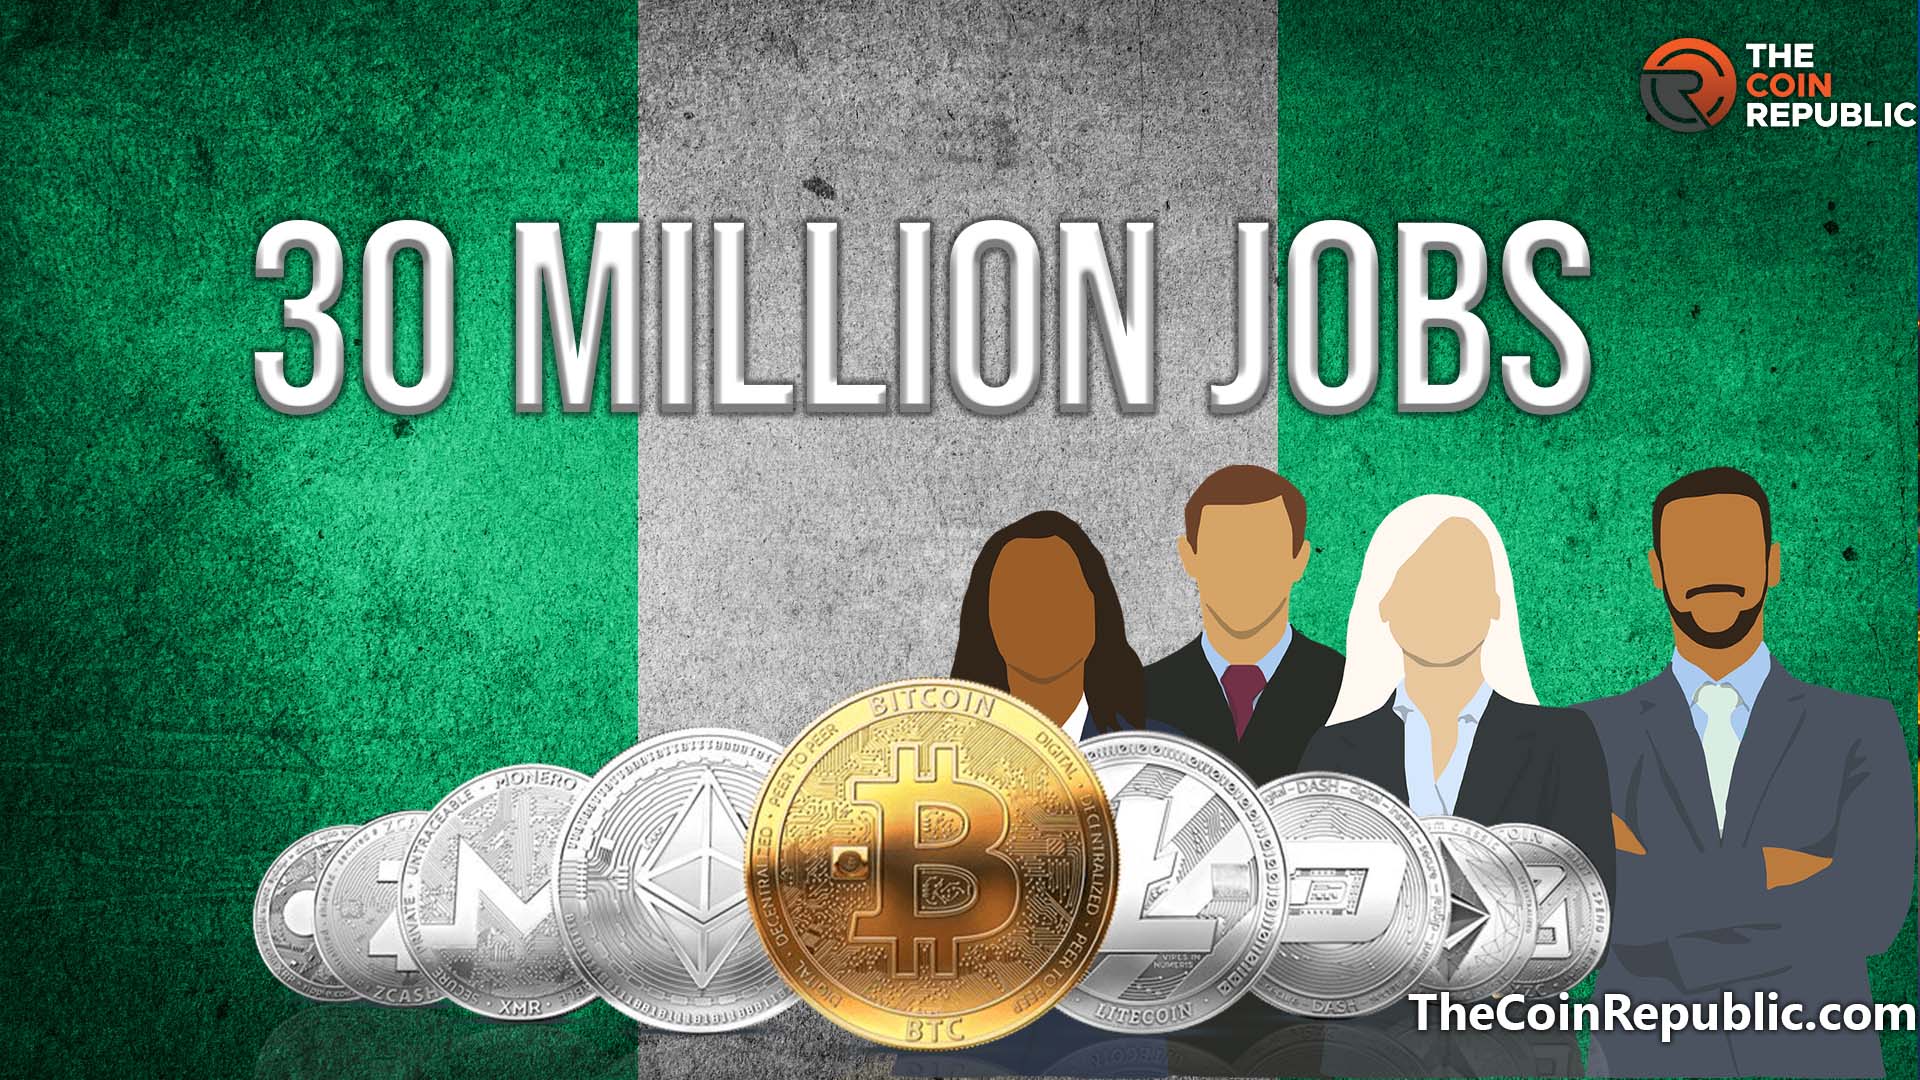 The Political Leaders Of Nigeria Are Jumping Into The Crypto World